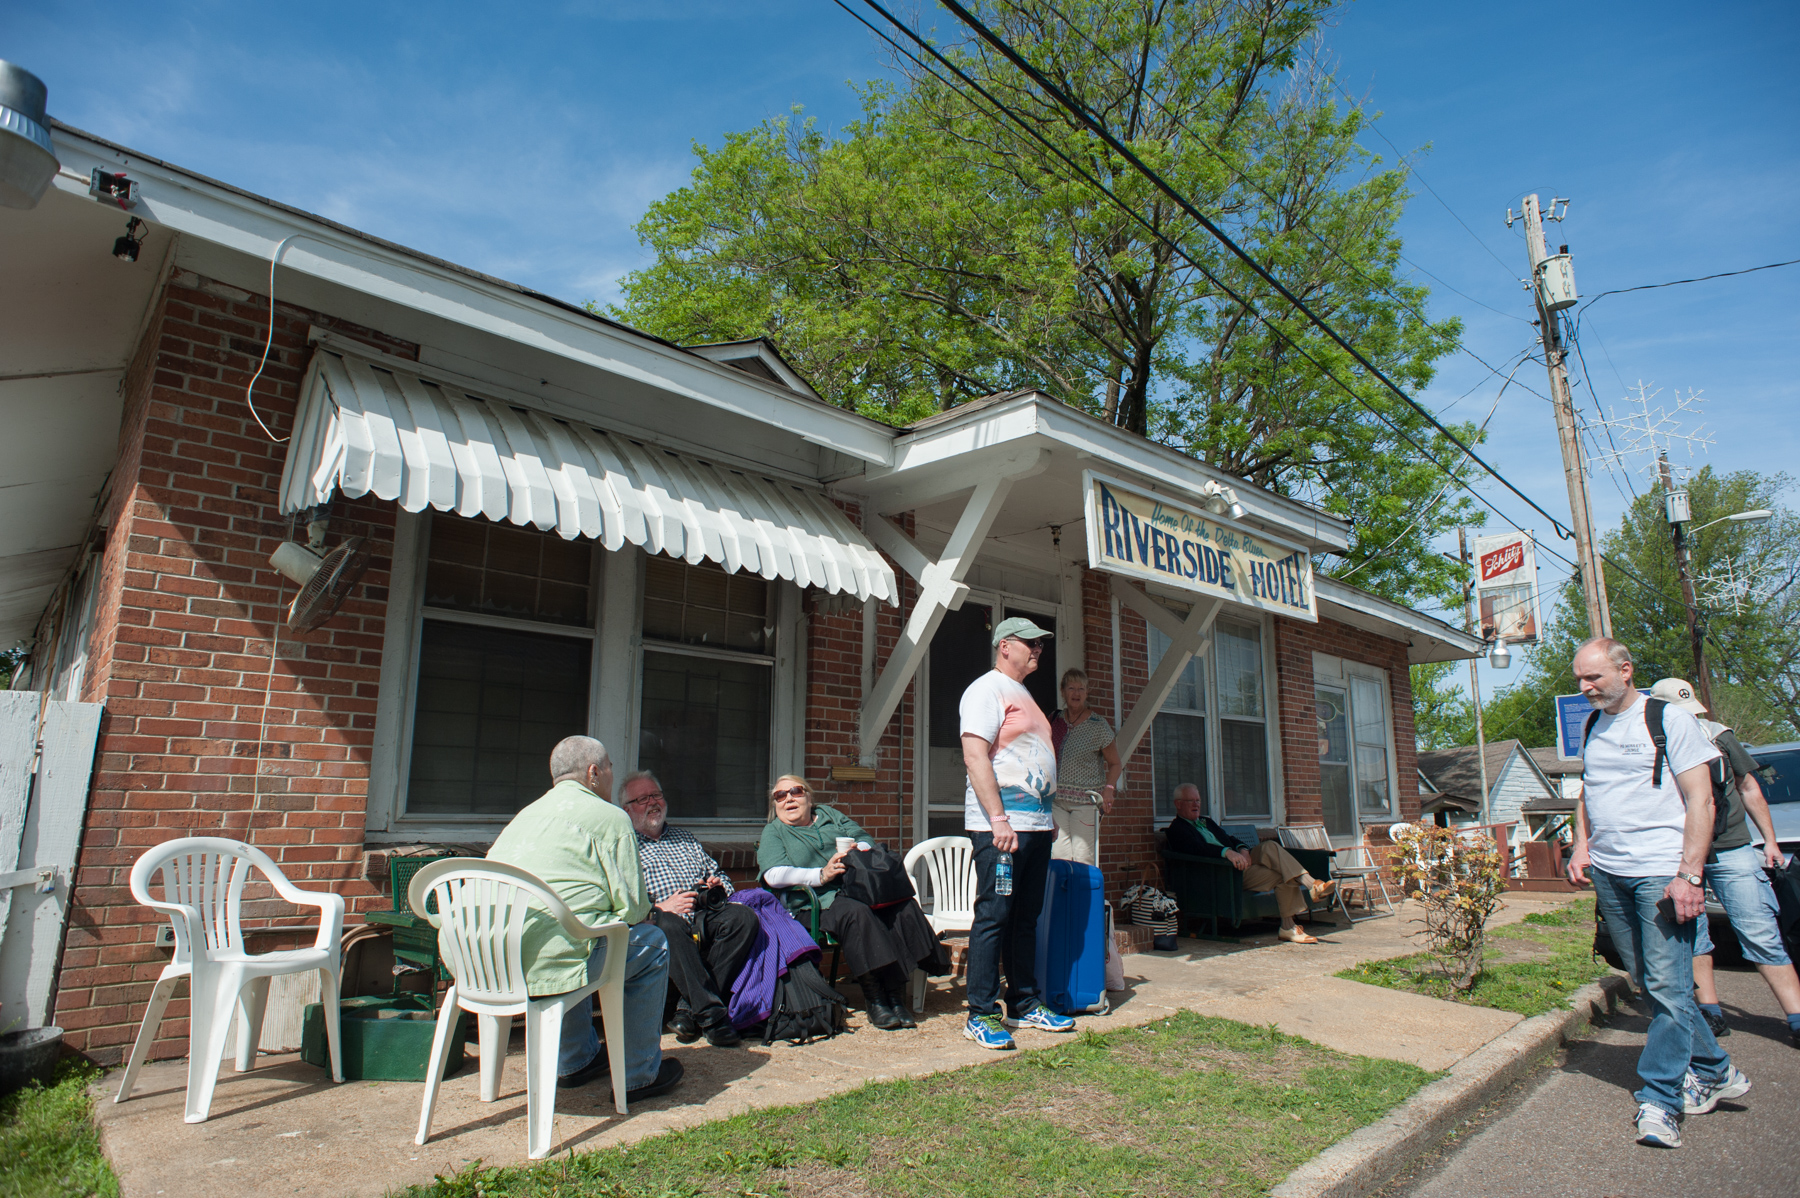  Members of the group relax in front of the Riverside Hotel, a former hospital for African Americans in Clarksdale. 